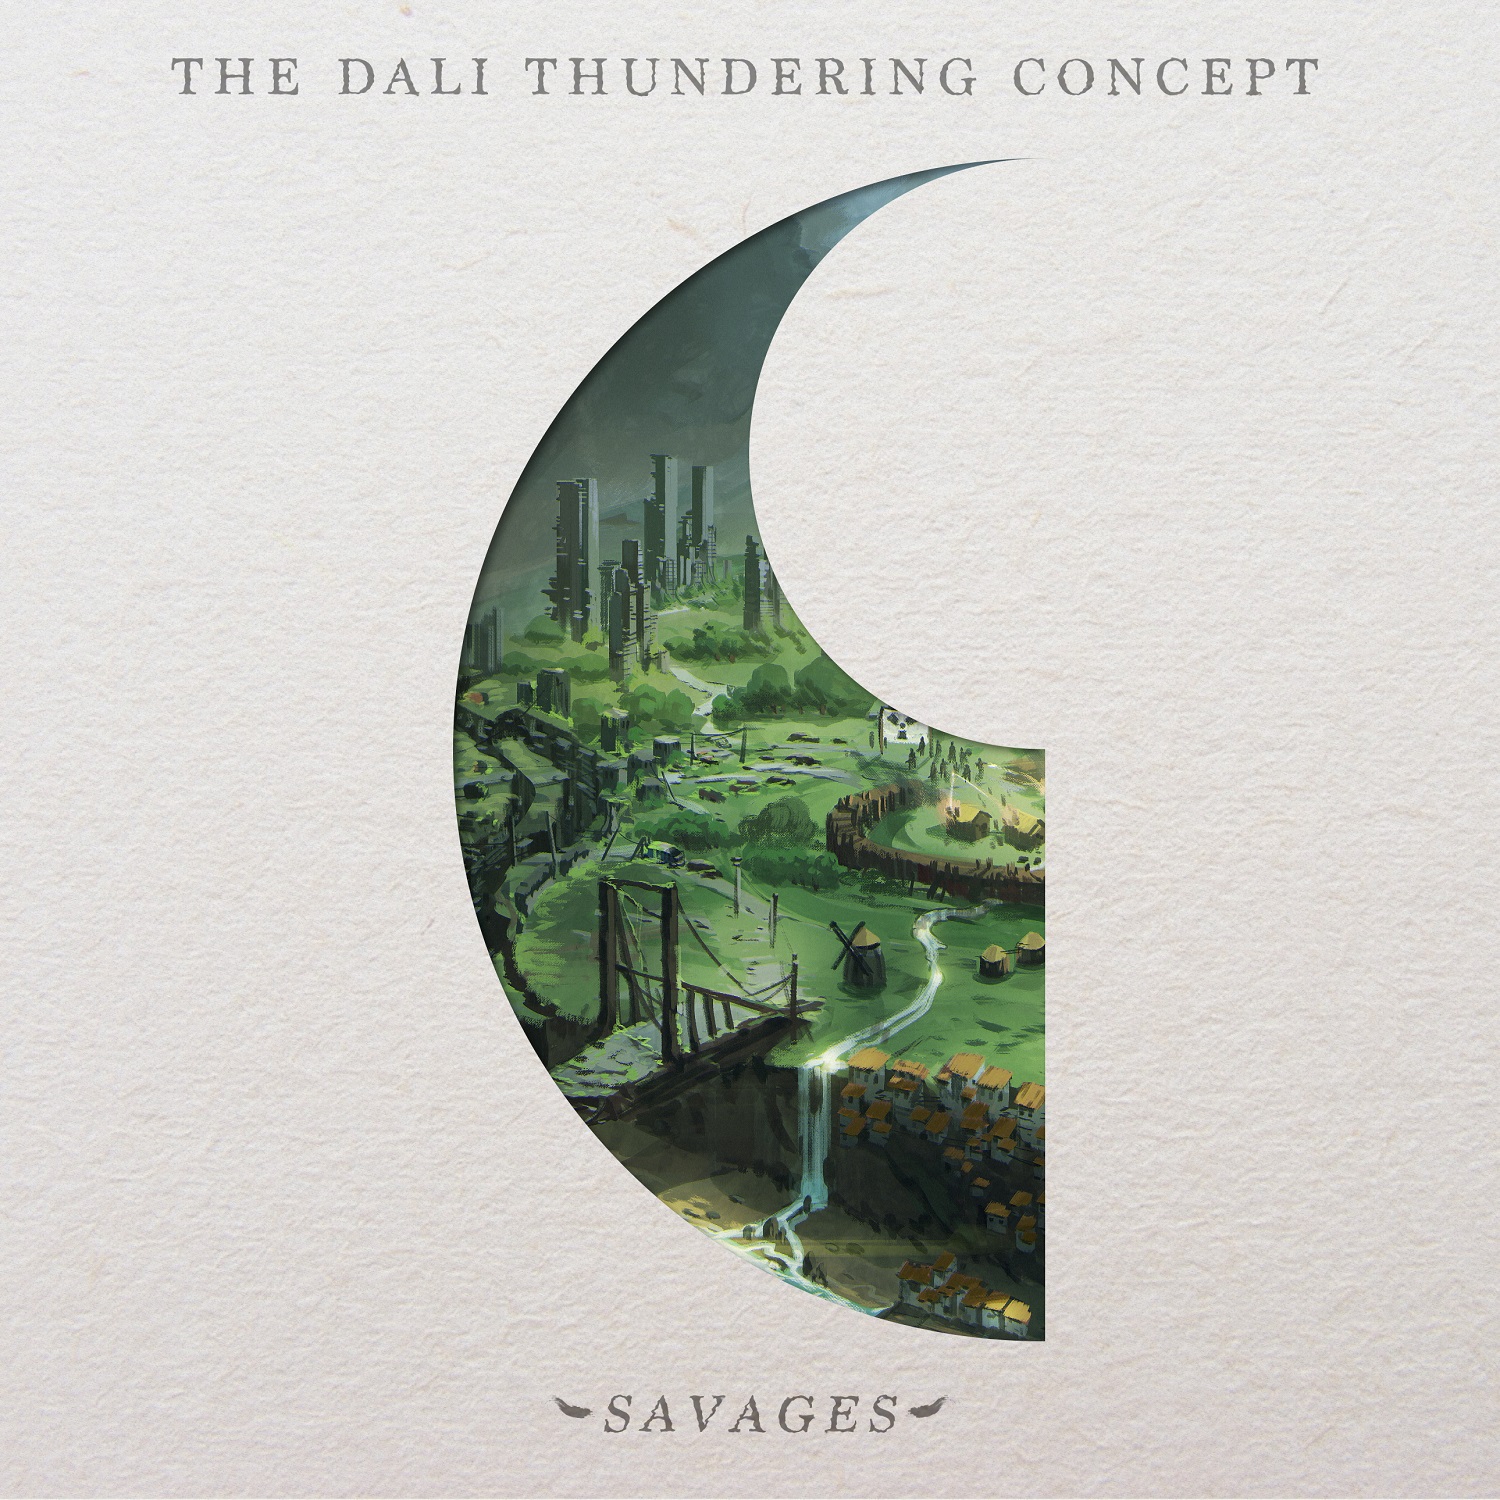 The Dali Thundering Concept – Savages